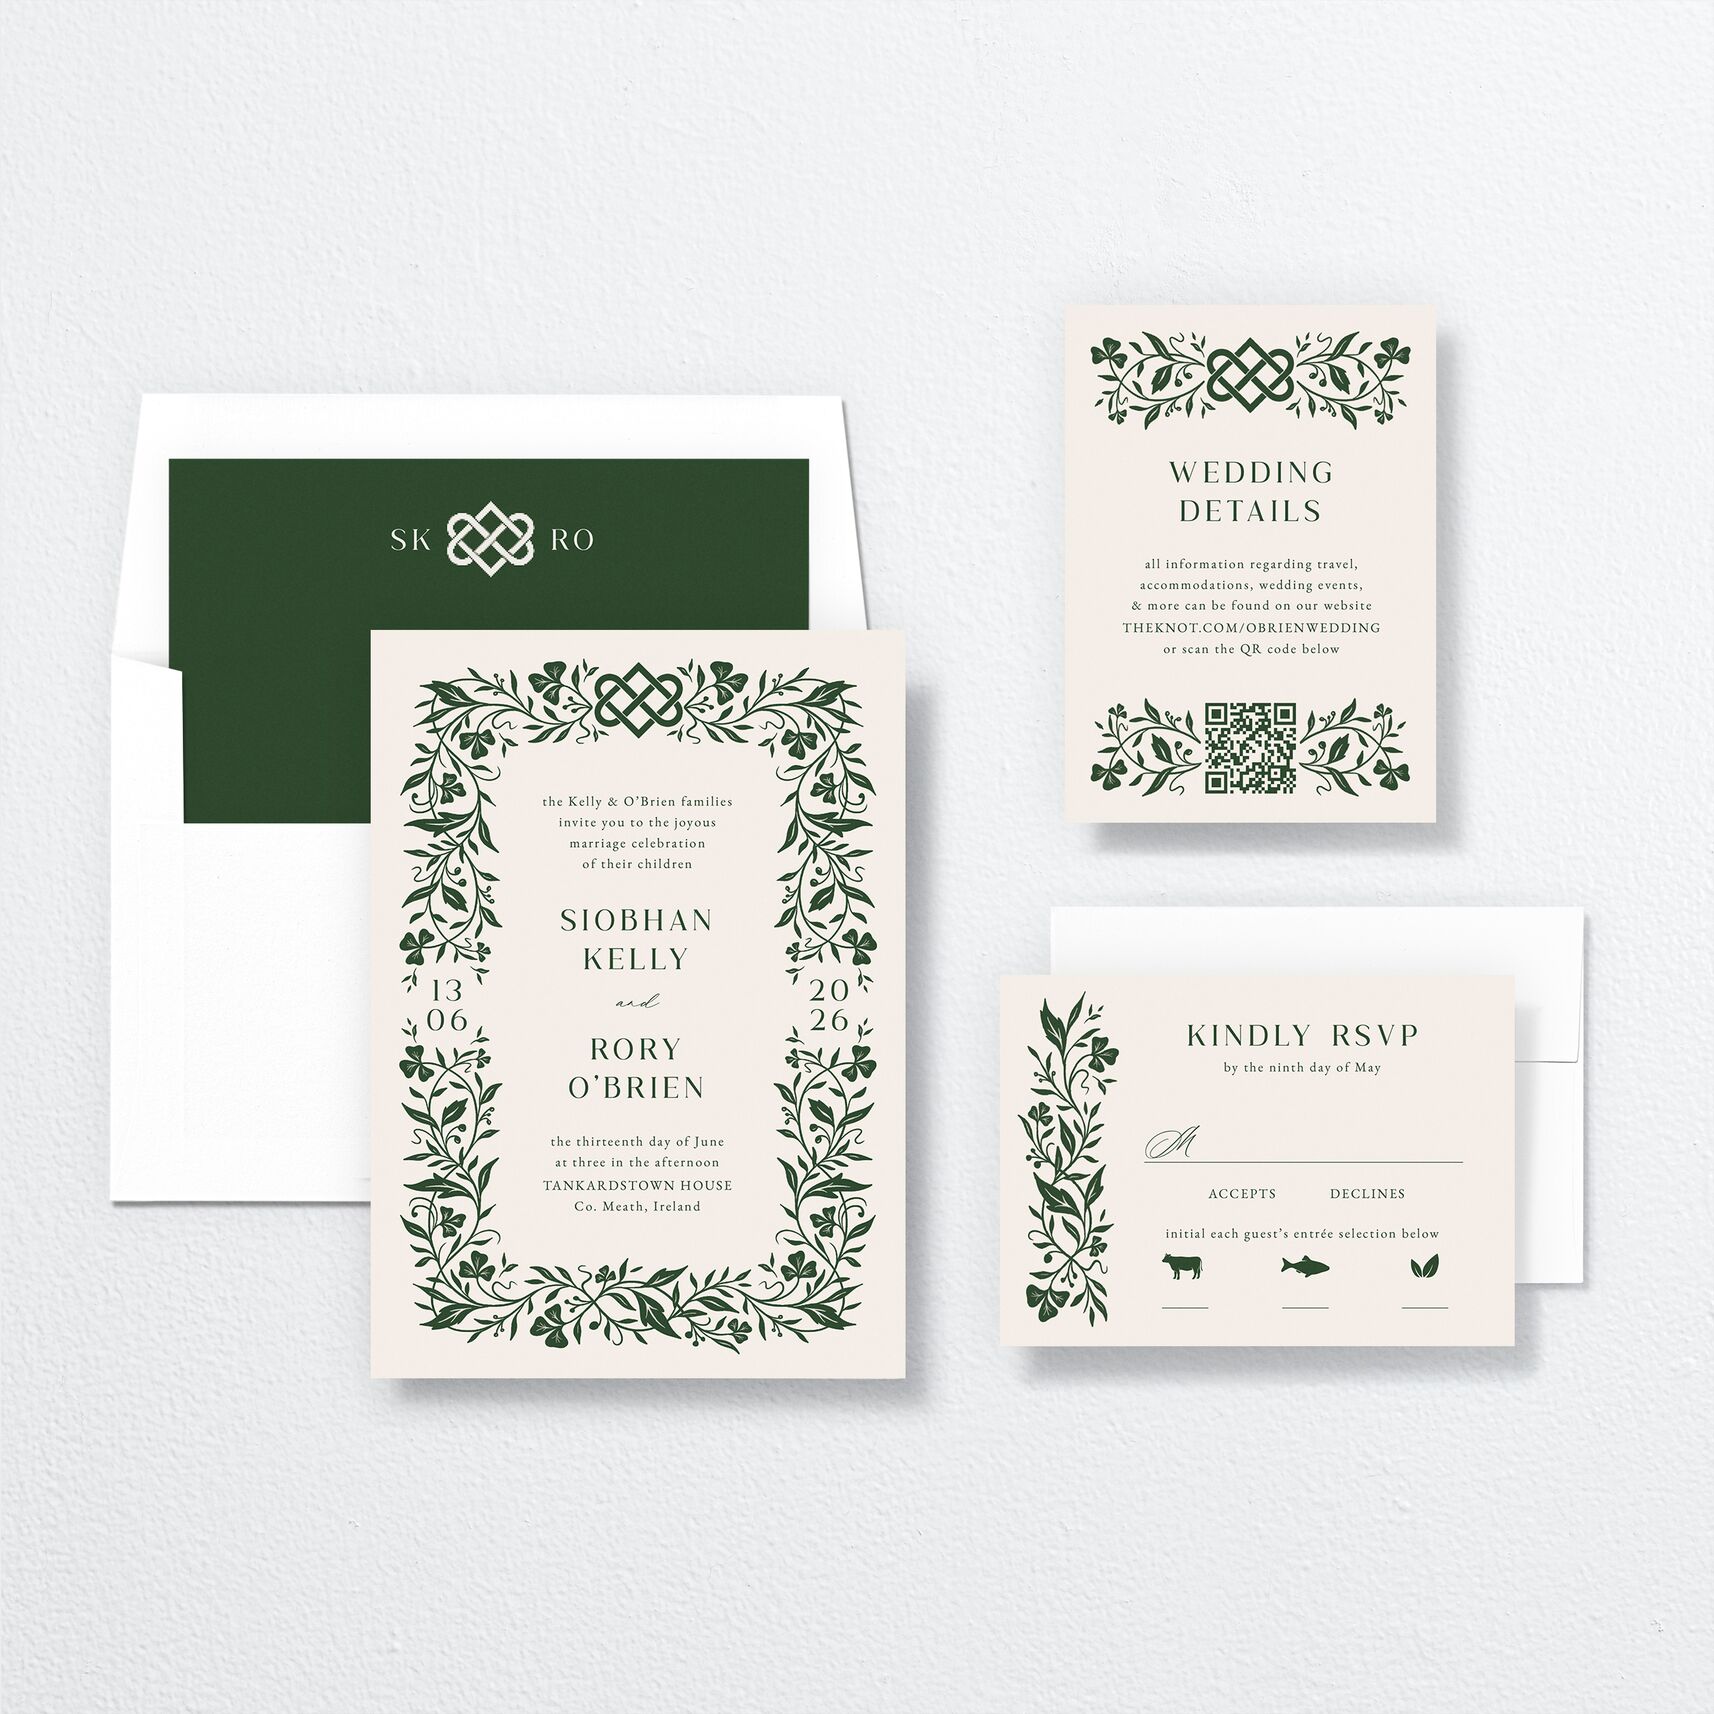 Celtic Knot Wedding Invitations suite in green